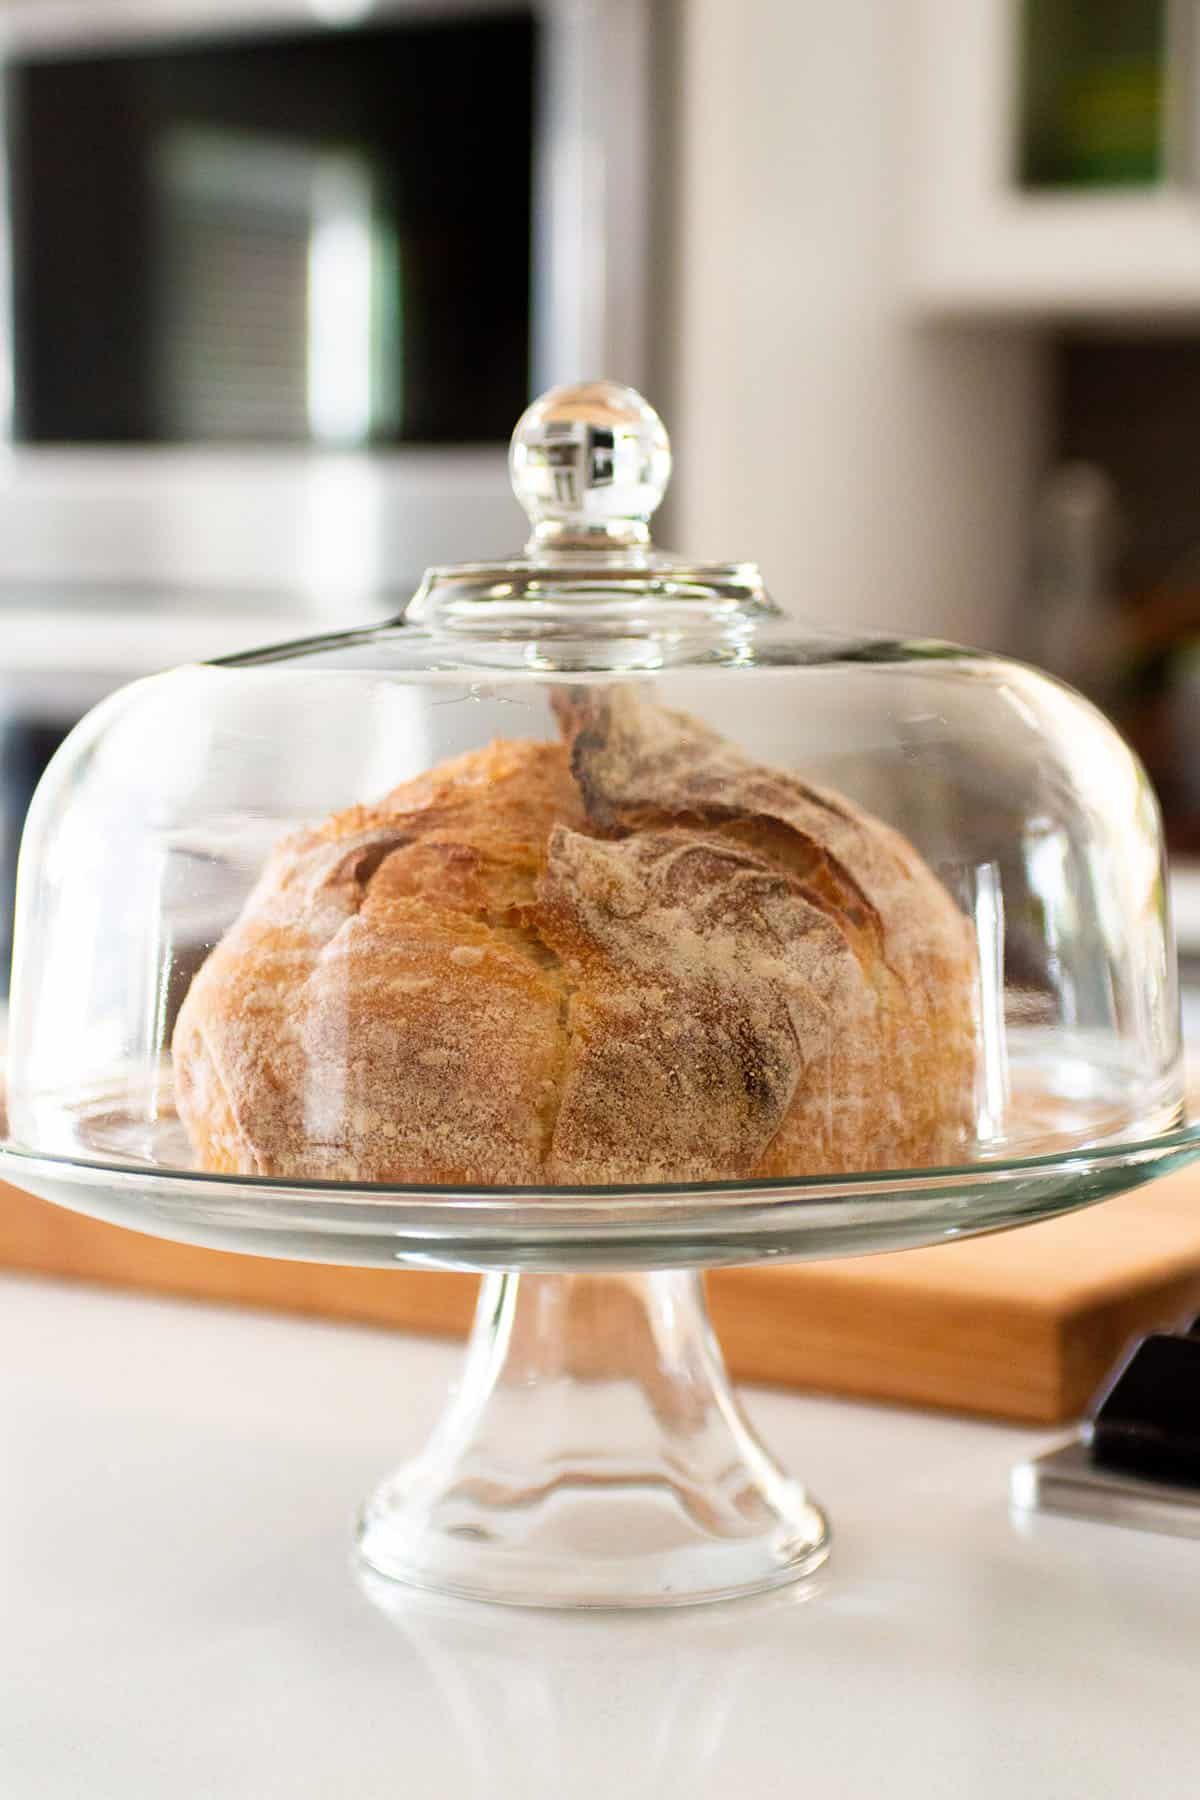 A loaf of sourdough bread being stored inside a dome cake plate.